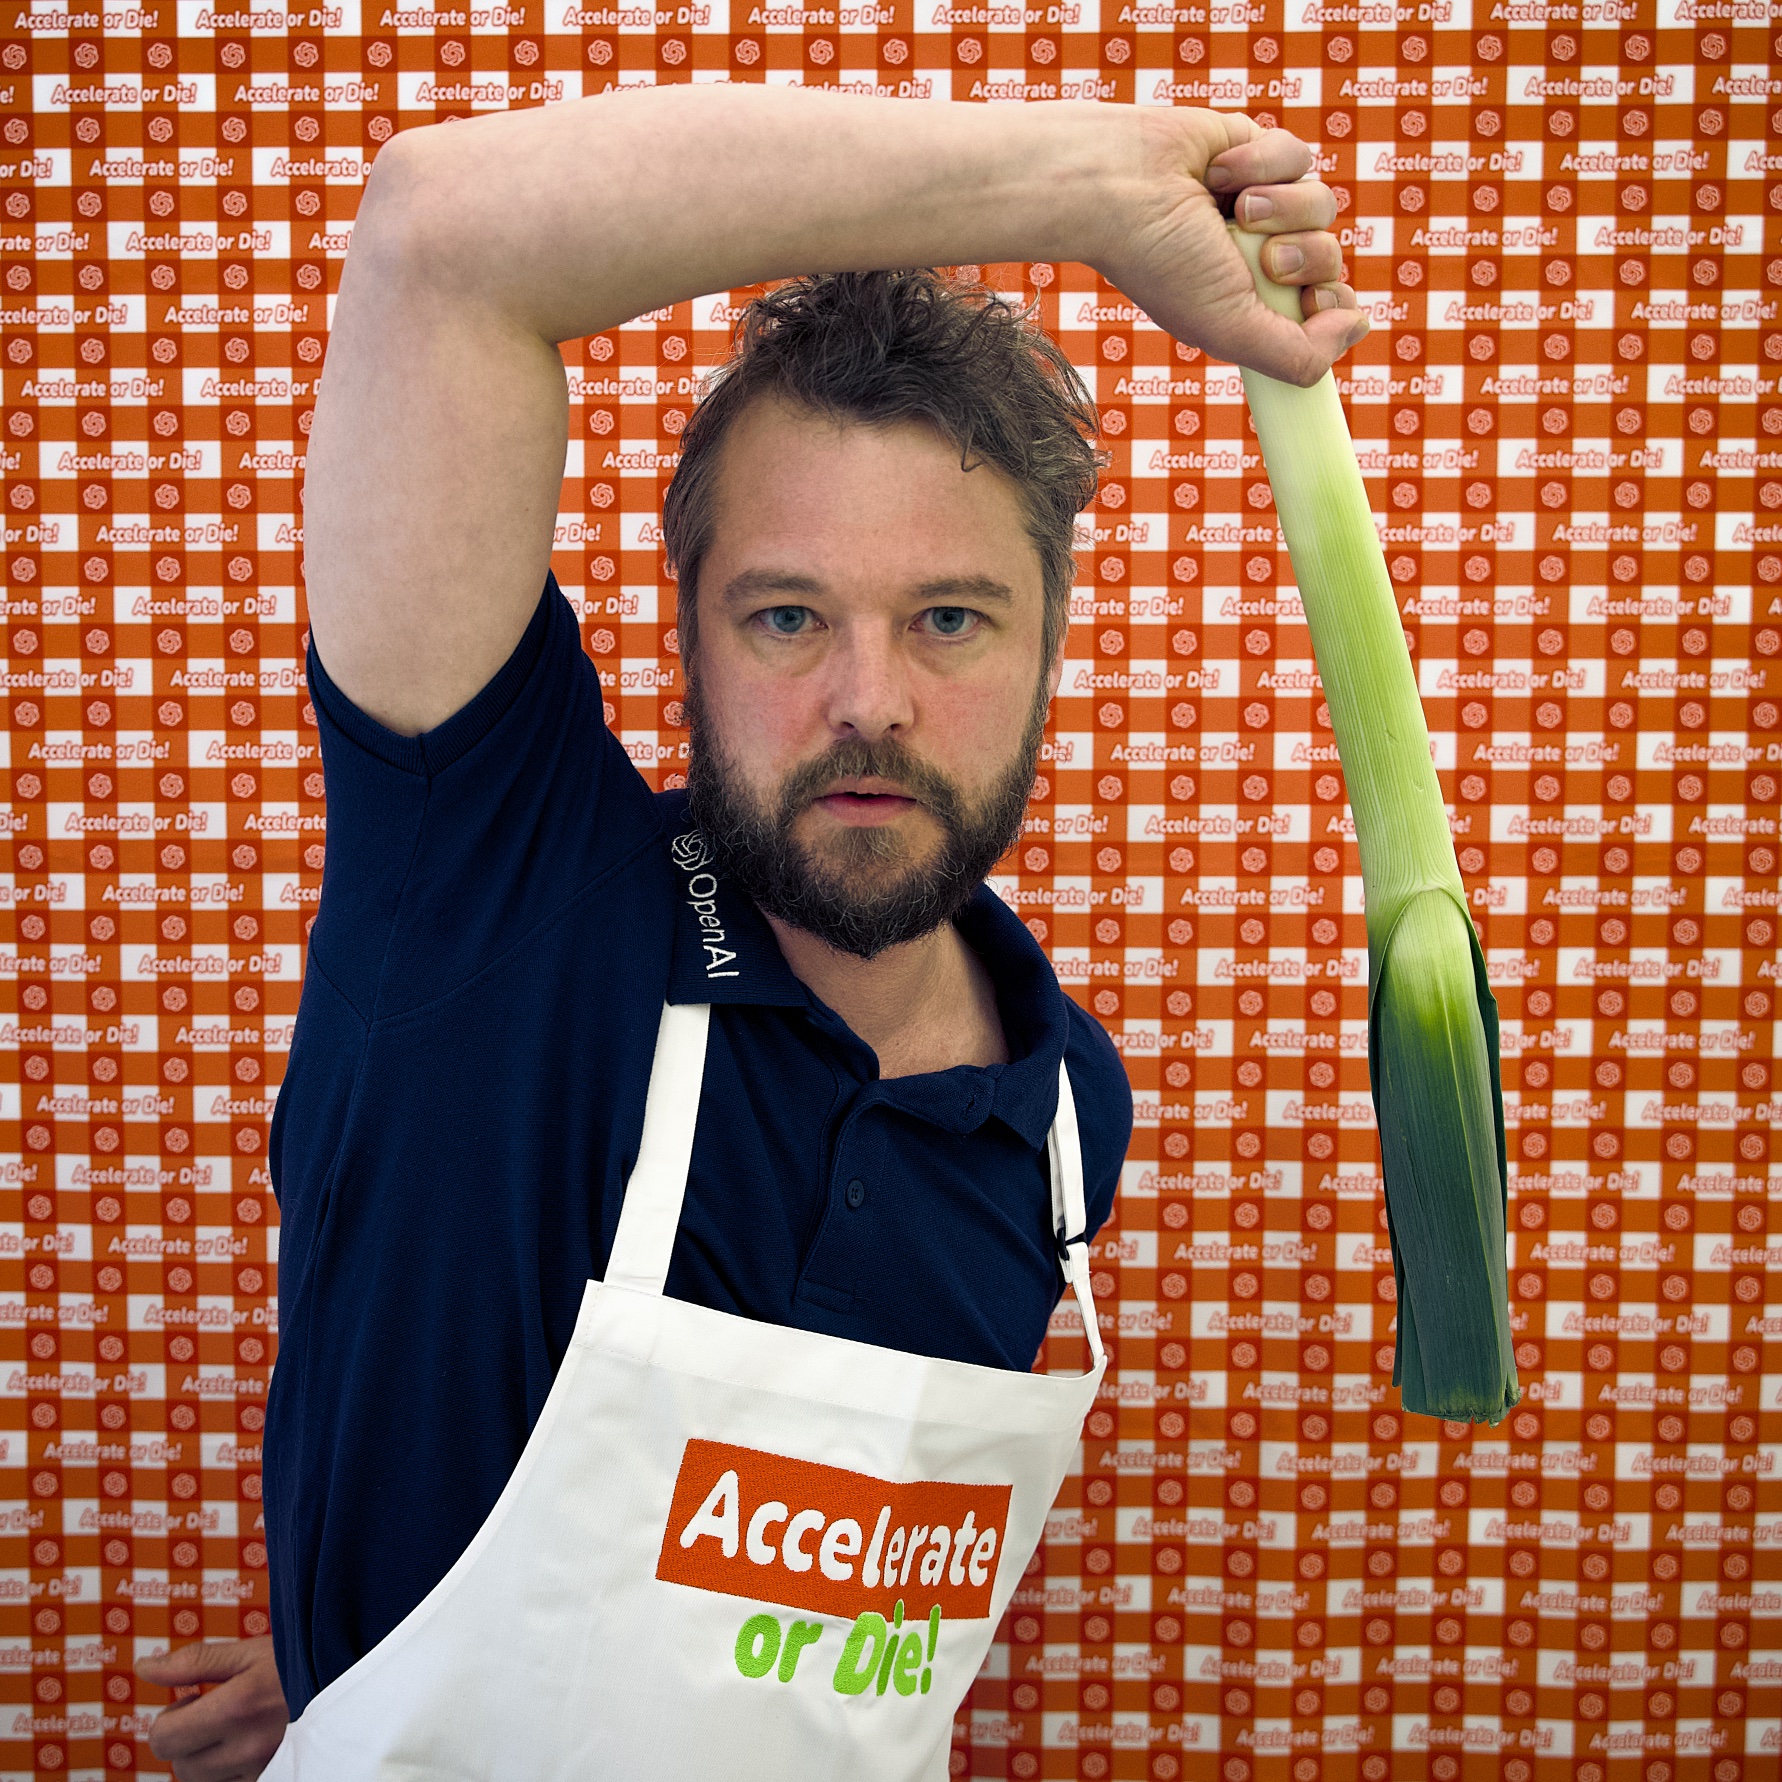 A man with a beard wearing a dark blue shirt and a white apron with the text "Accelerate or Die" stands against a backdrop with repeated logos. He holds a leek over his head with his left hand, looking intently at the camera.